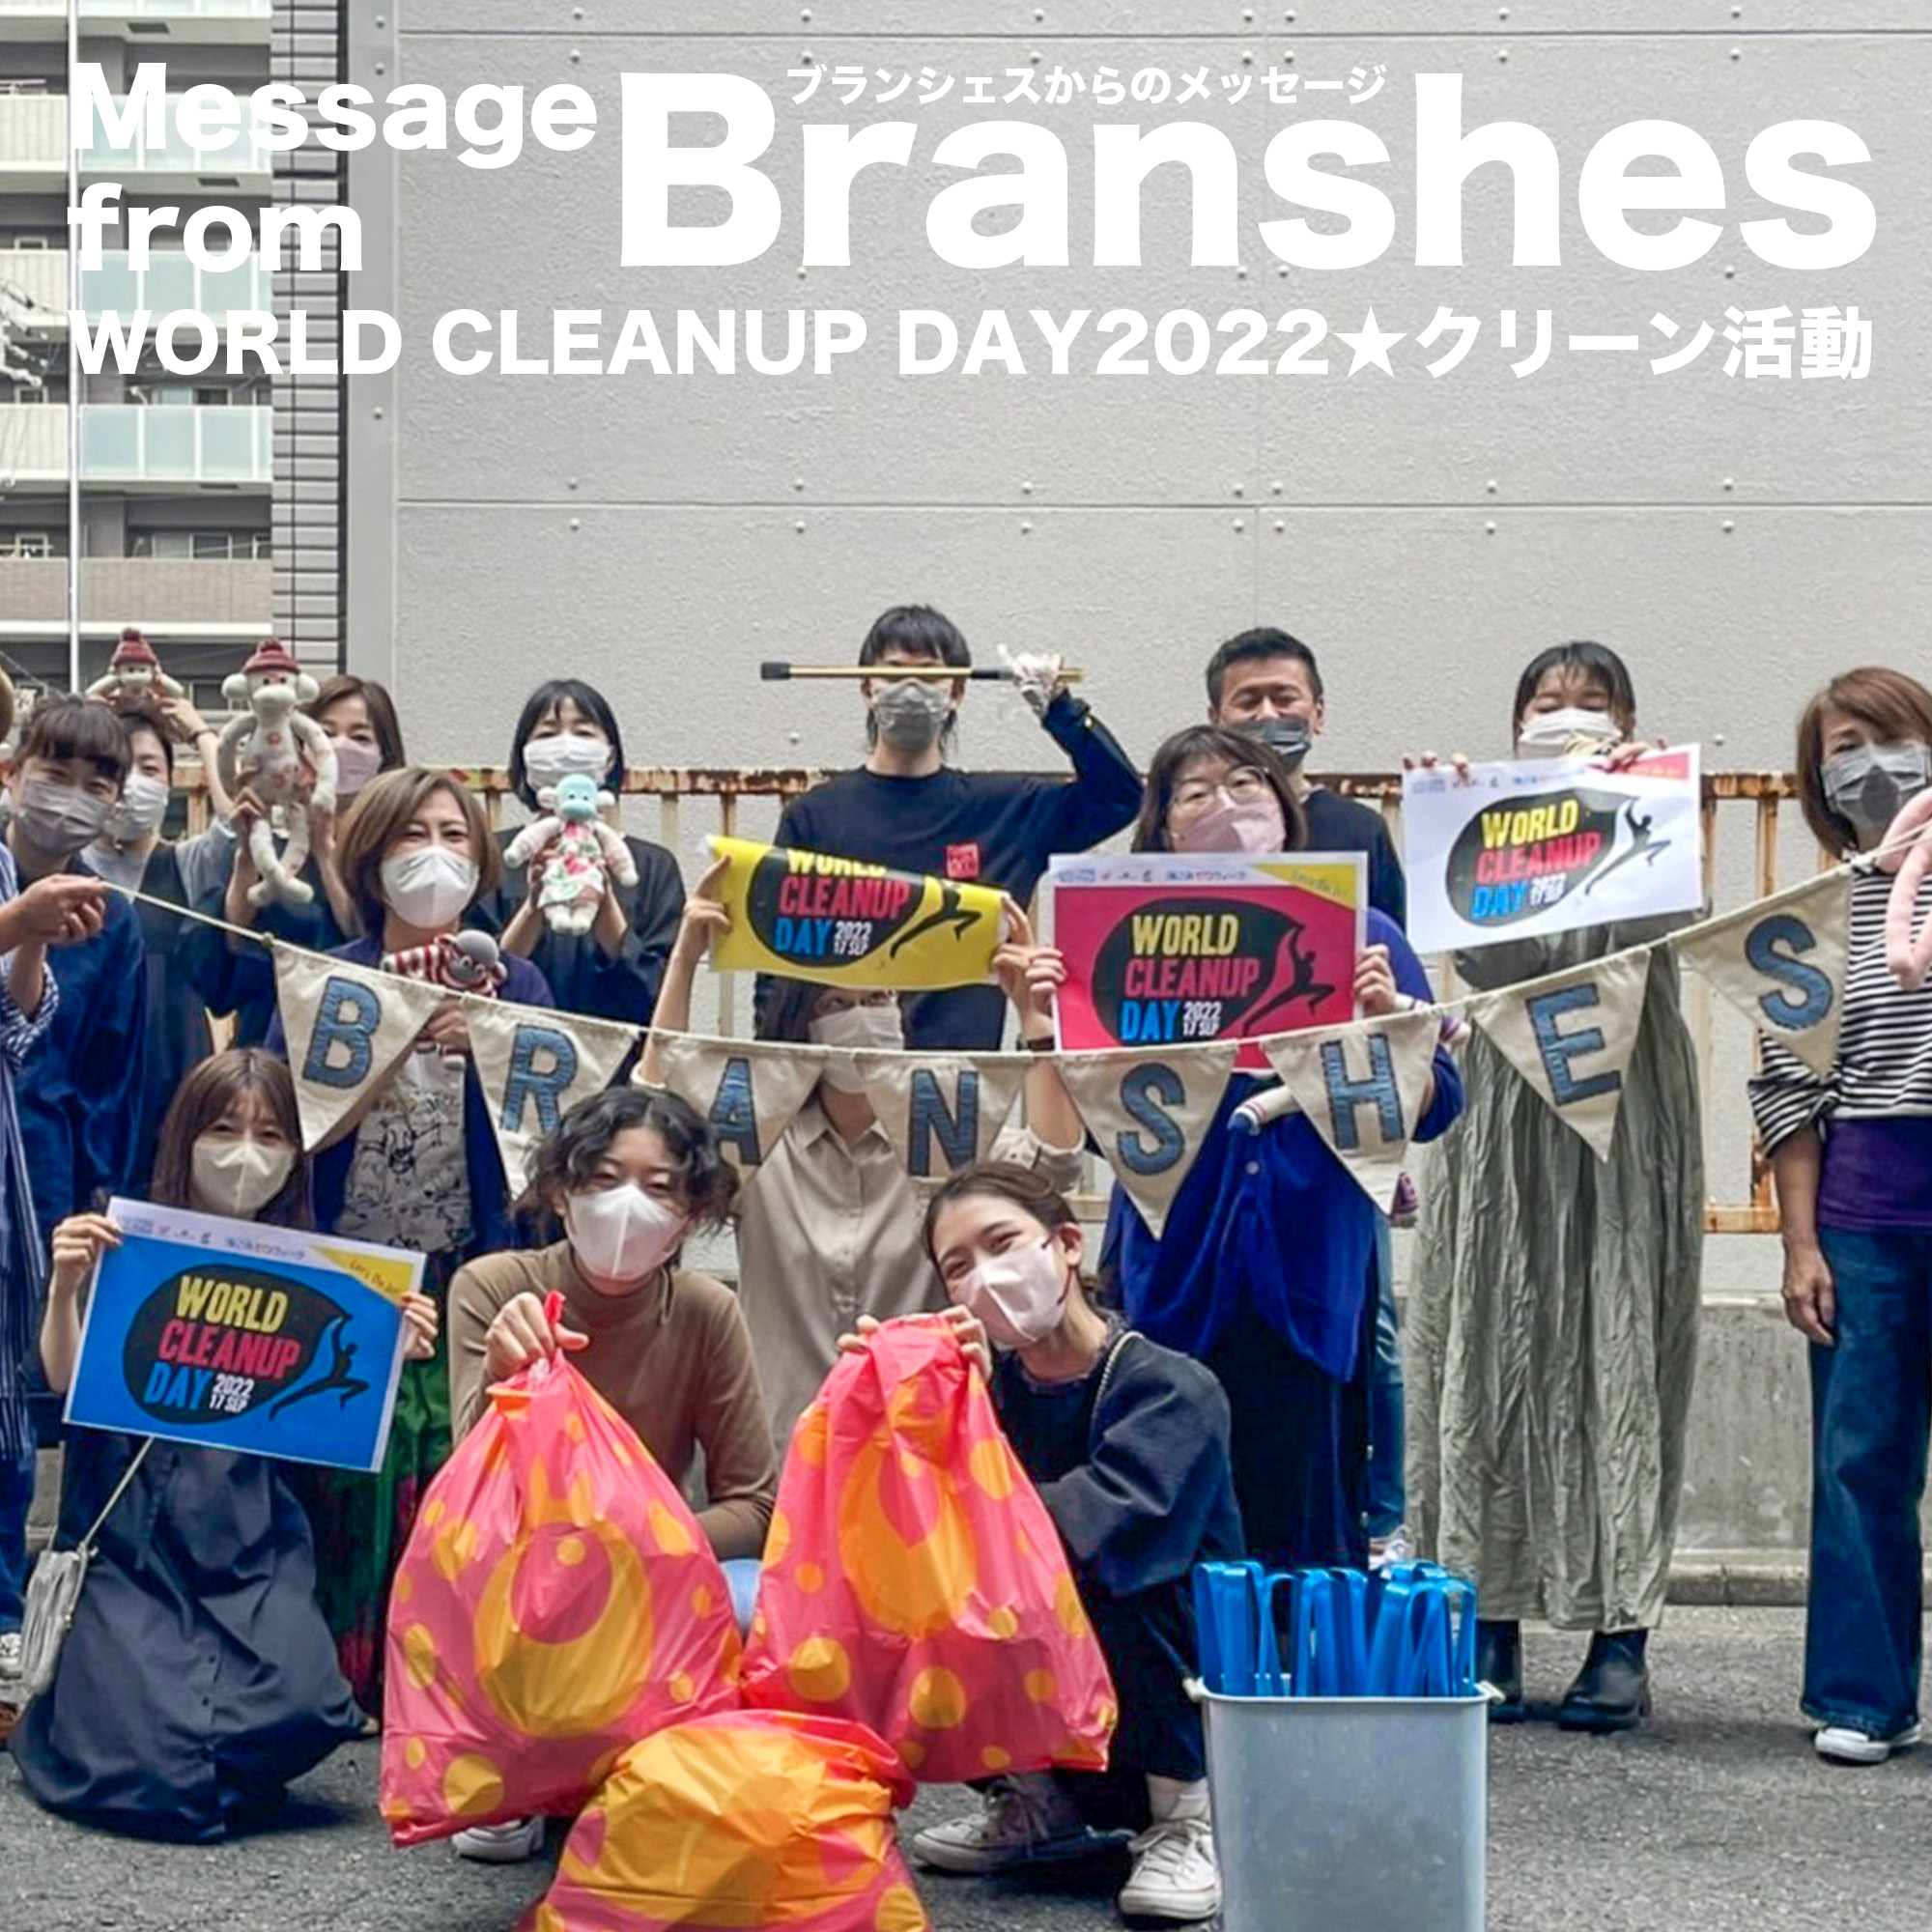 WORLD-CLEANUP-DAY2022